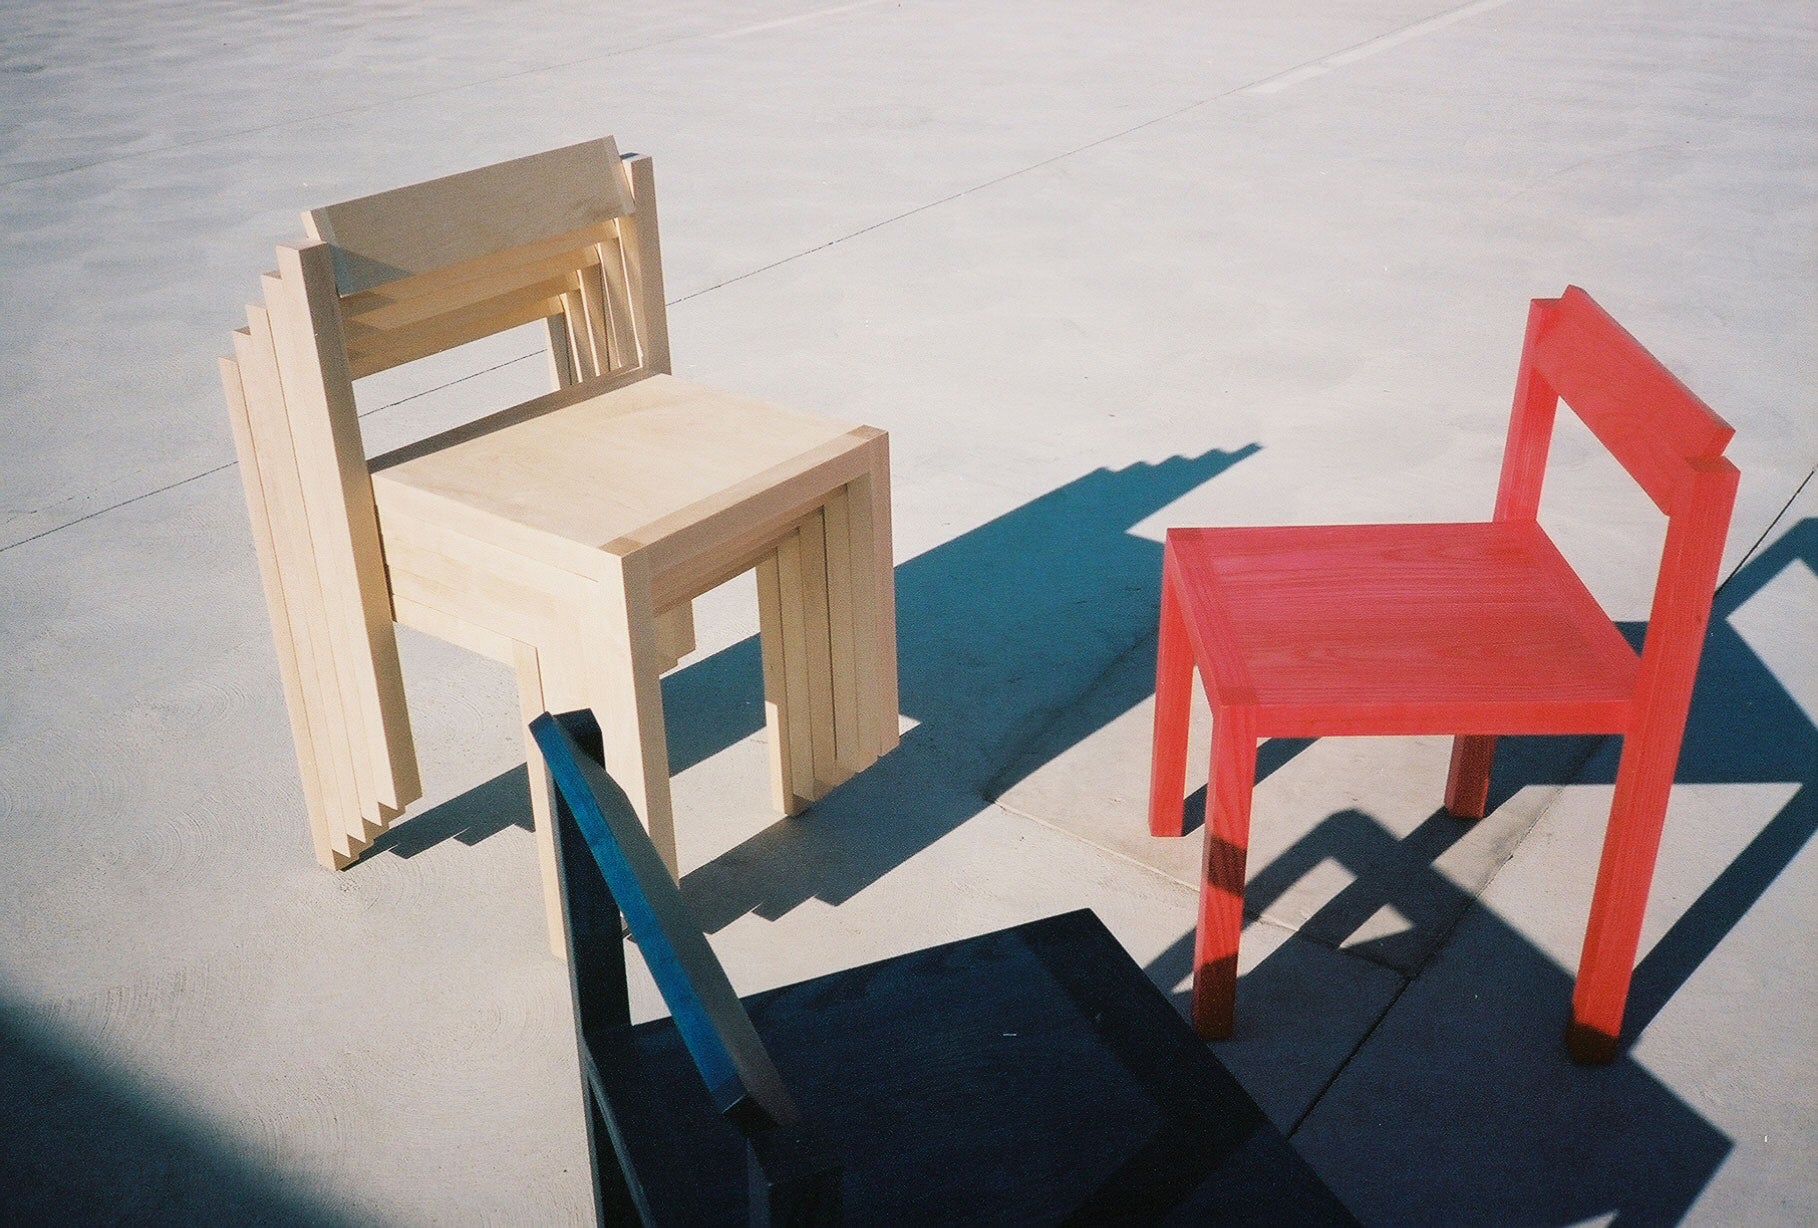 Red, Black, and an assortment of natural finish Anything Chairs stacked on concrete.